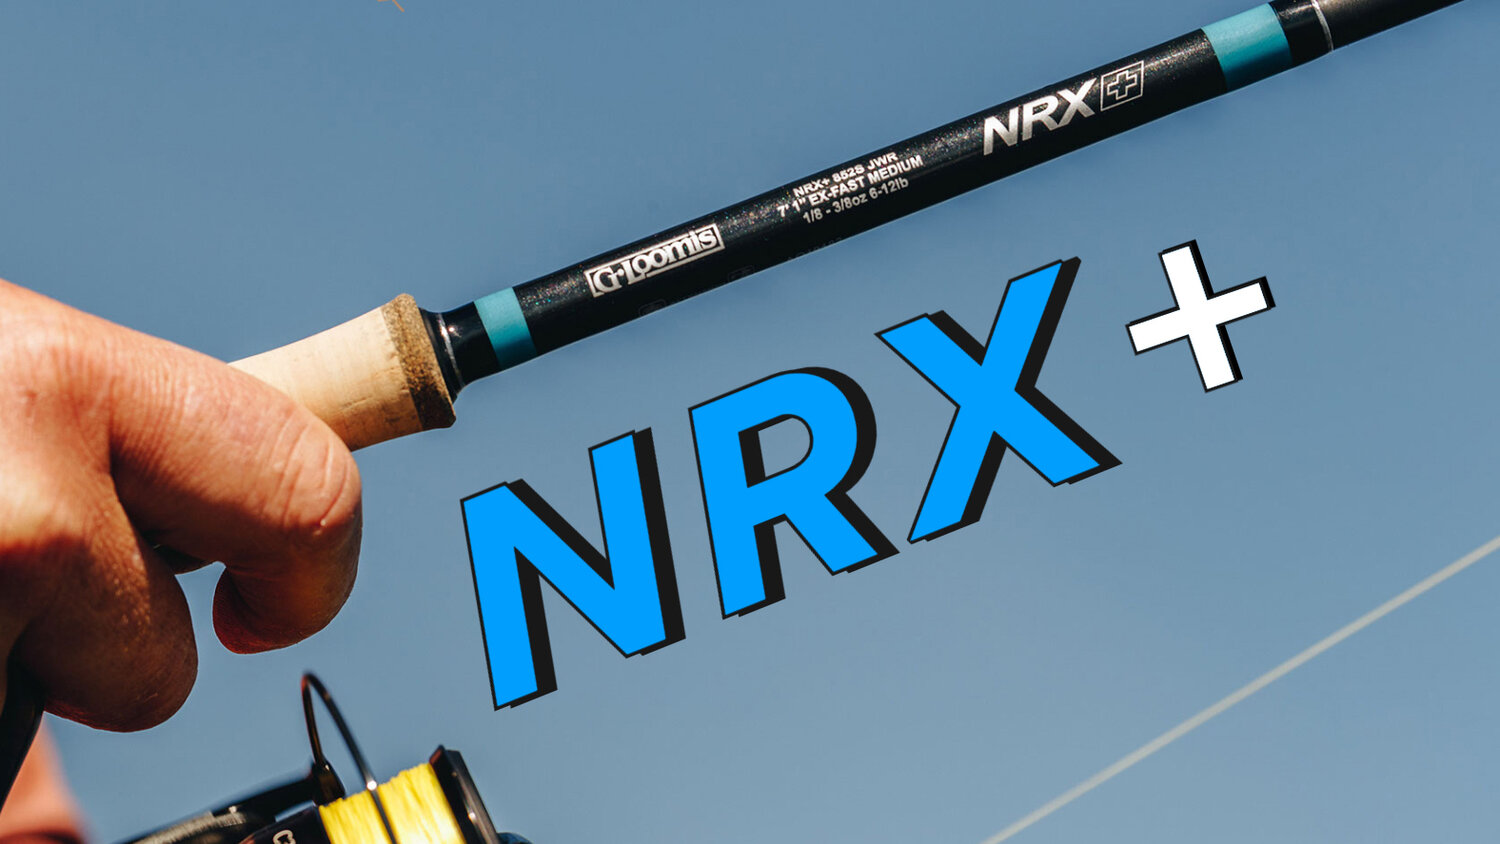 G.Loomis NRX 8783C fishing rod review